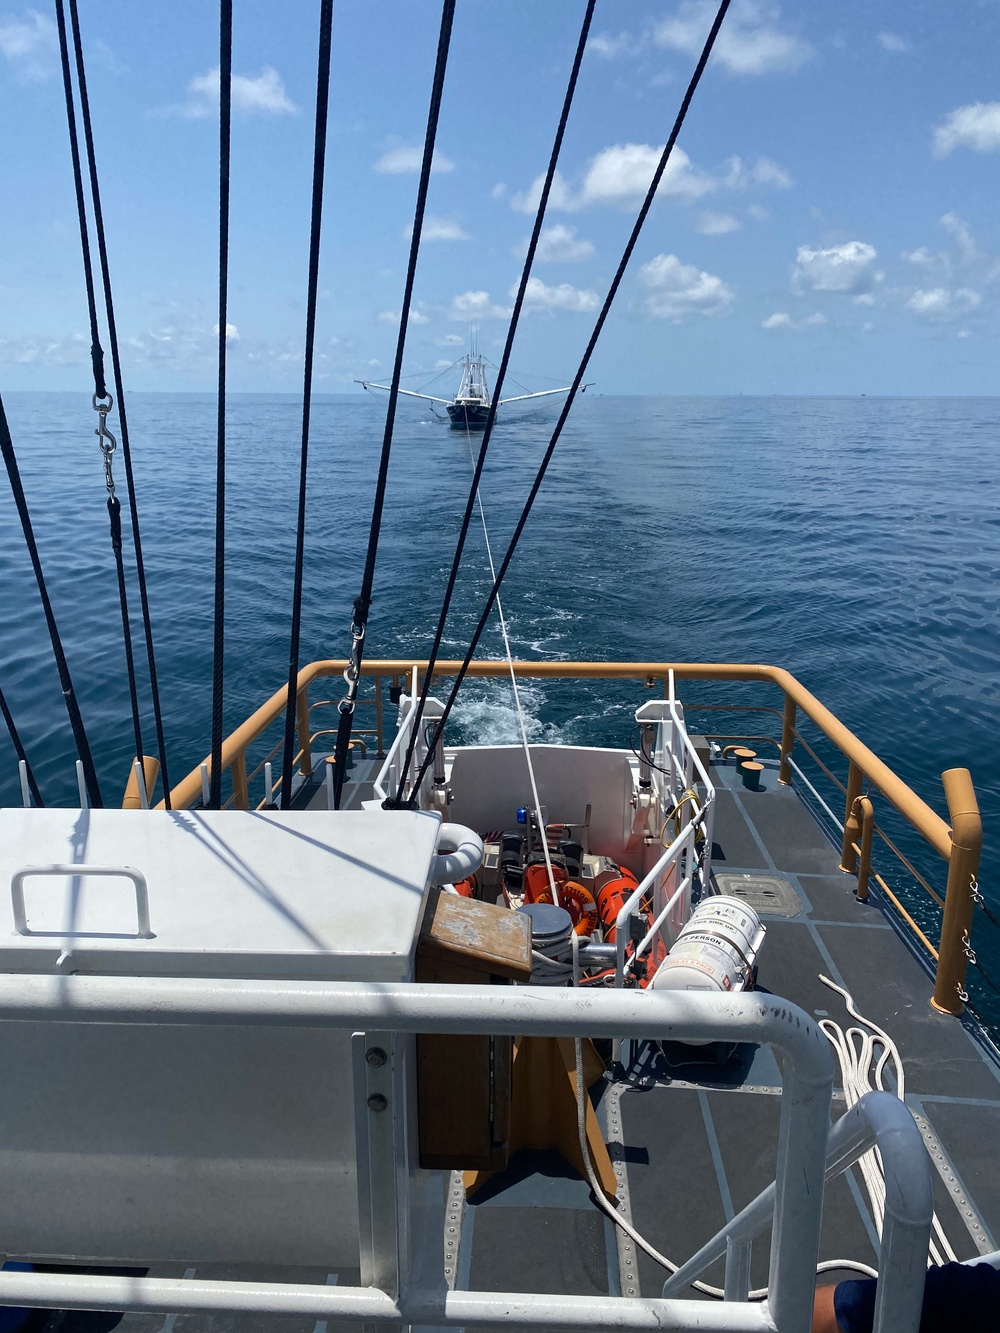 Coast Guard assists 5 aboard fishing vessel after collision near Port O'Connor, Texas